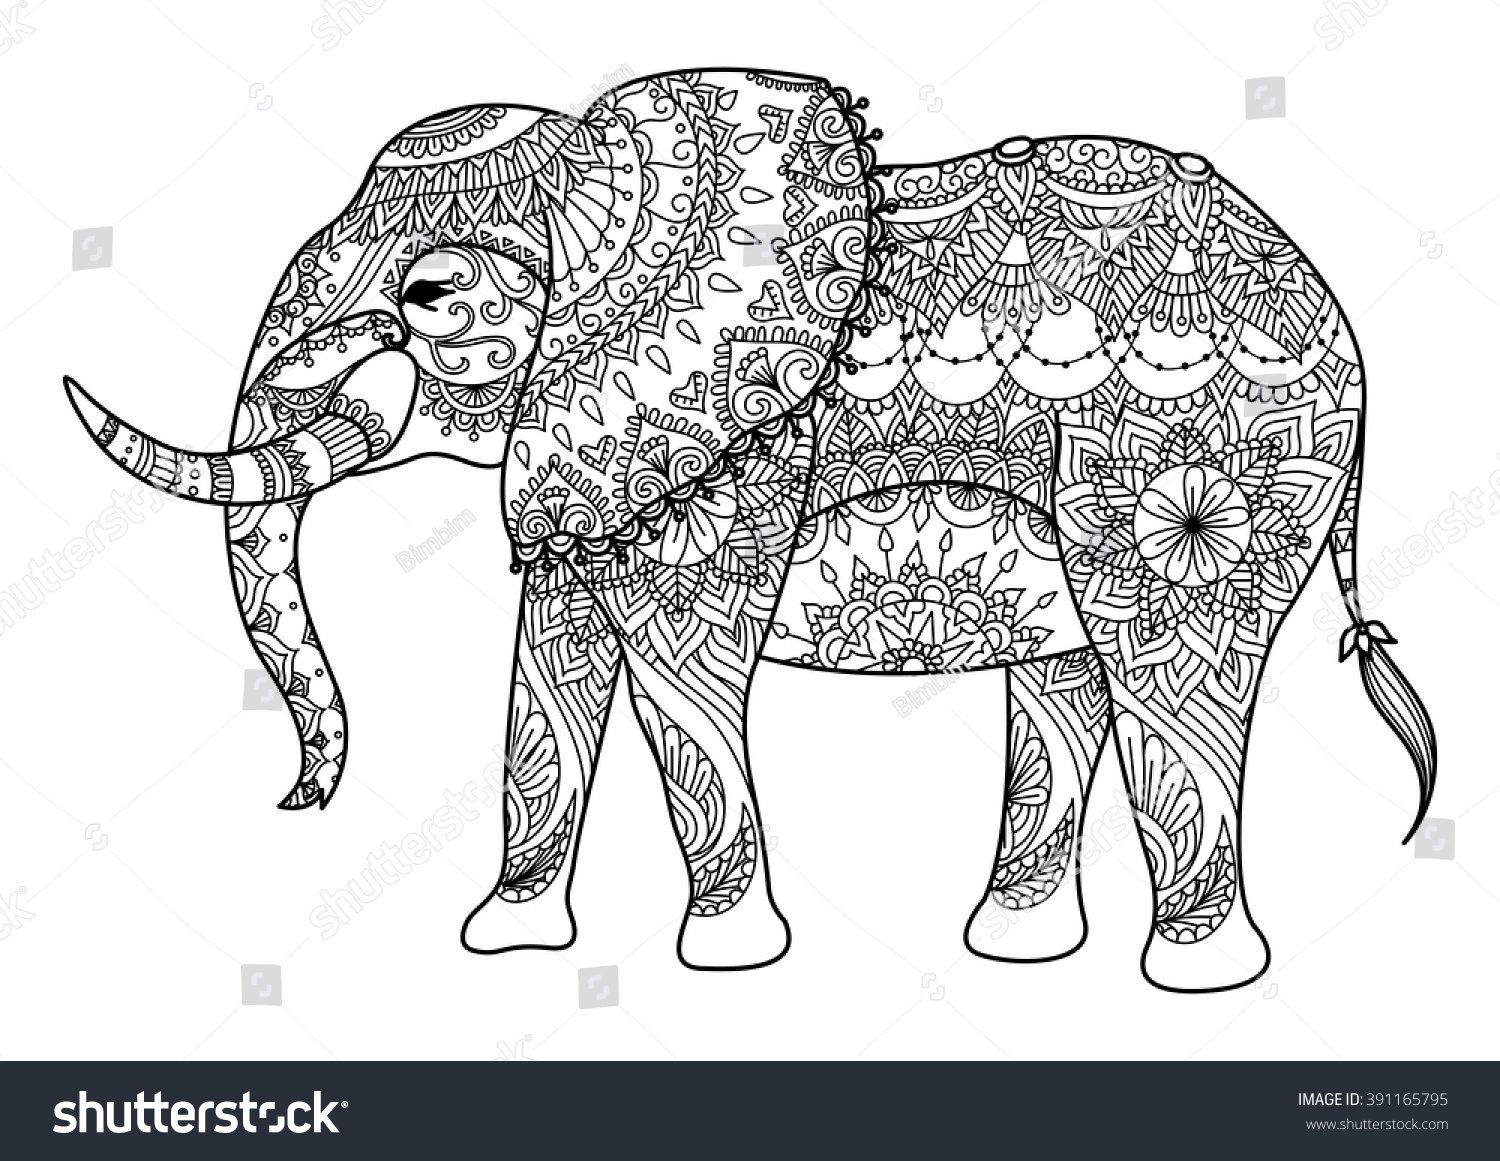 SVG of Mandala elephant line art design for card, tattoo, banner, coloring book and so on - stock vector svg